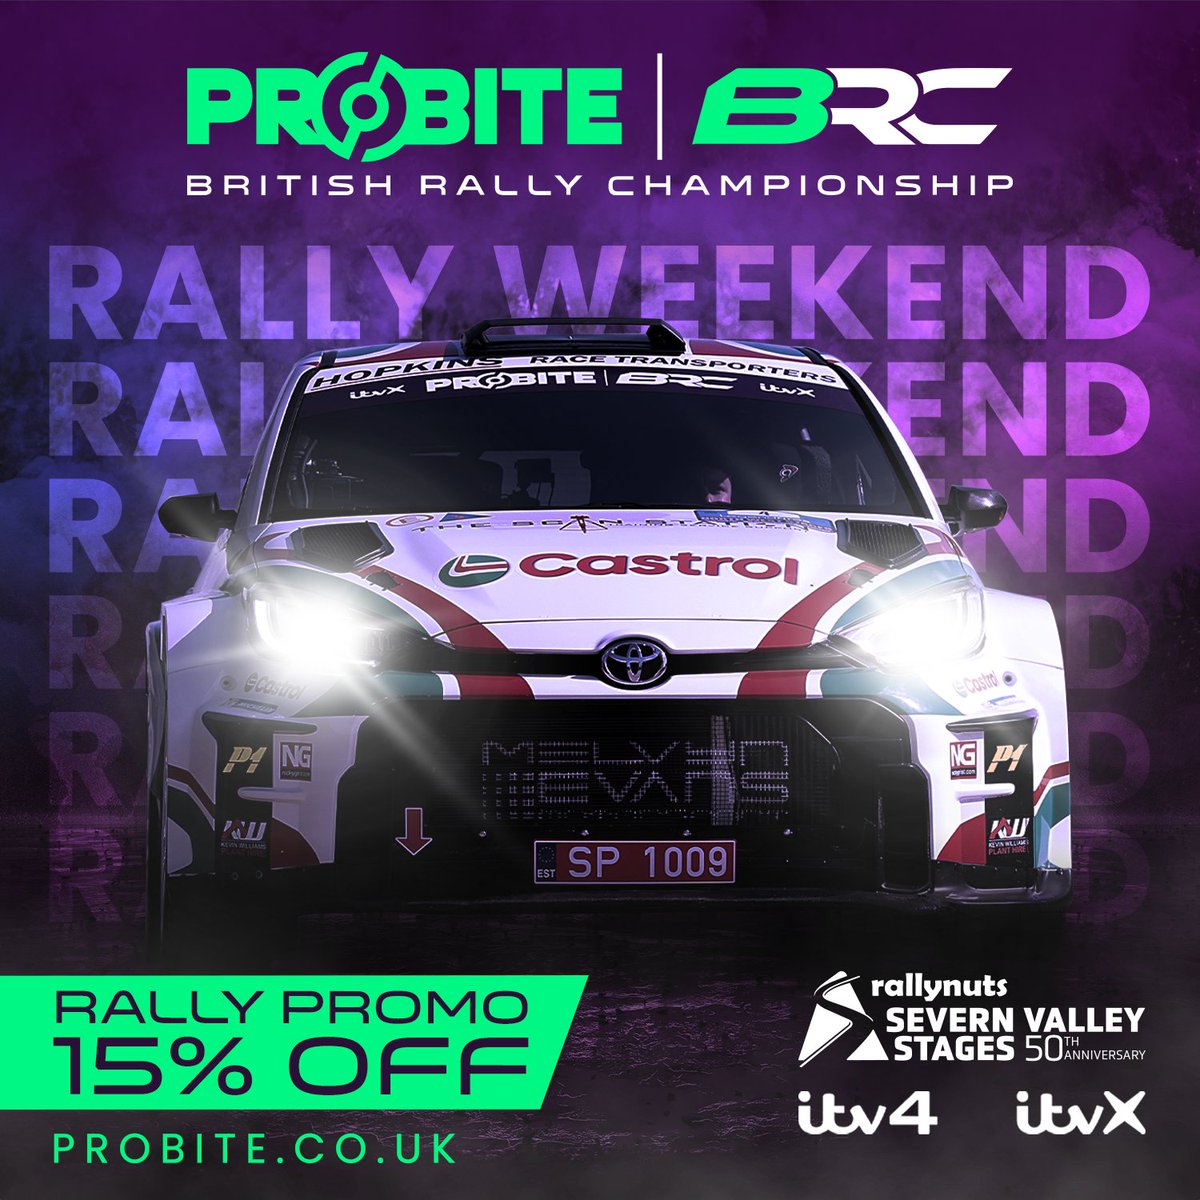 It’s nearly here - rally weekend is coming! To celebrate round 2 of the Probite British Rally Championship in Wales, we’re offering a huge 15% off all performance braking! Just use code SEVERNVALLEY15 at checkout. Valid until 16/4/24. Don’t miss out! #probite #probitebrc #brc